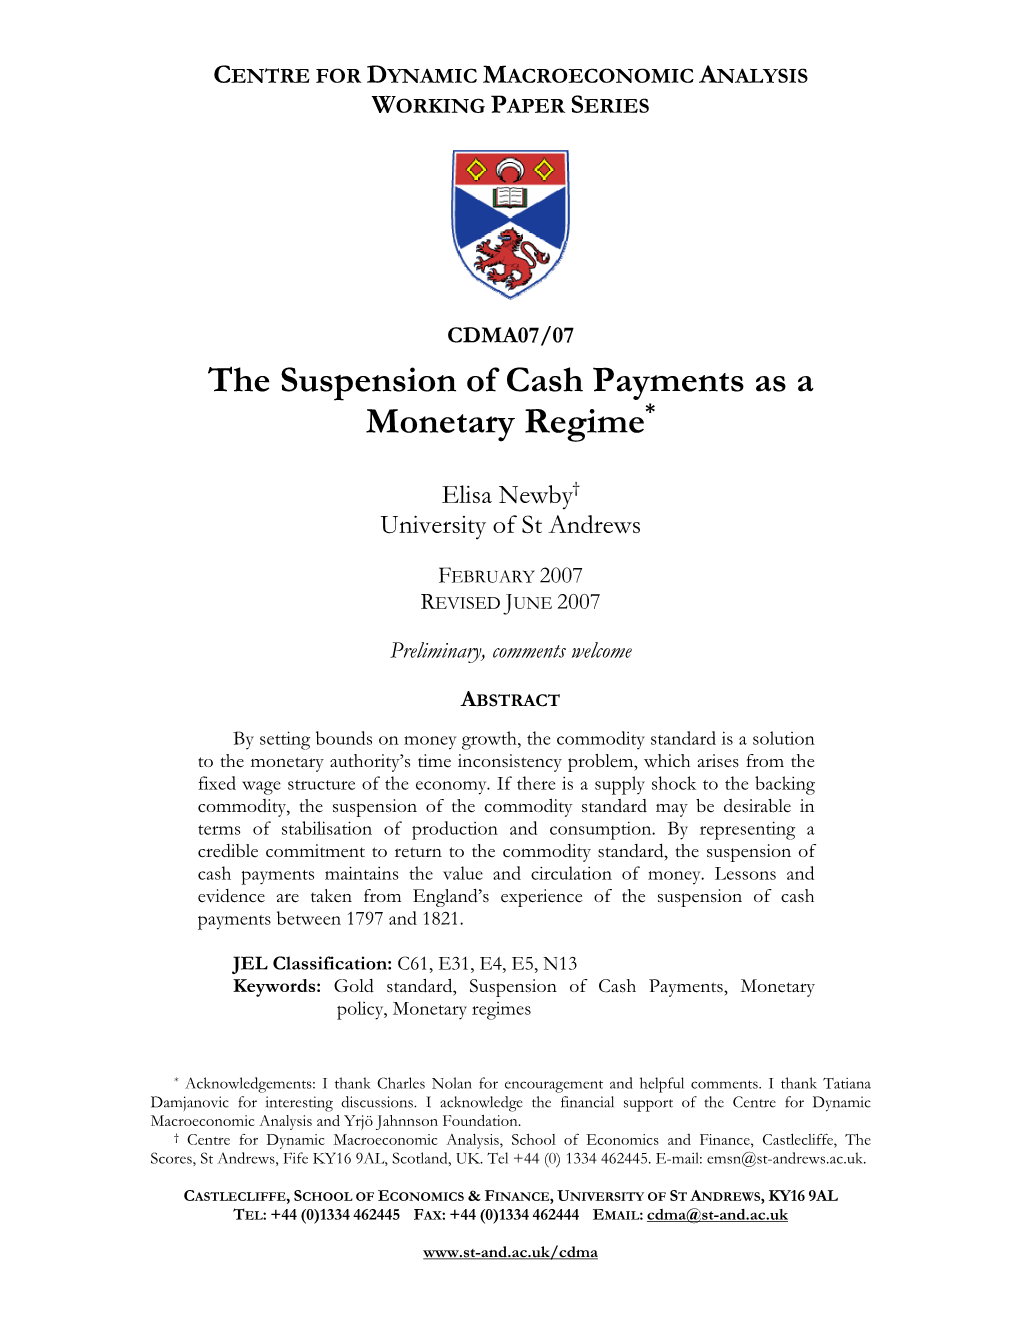 The Suspension of Cash Payments As a Monetary Regime*